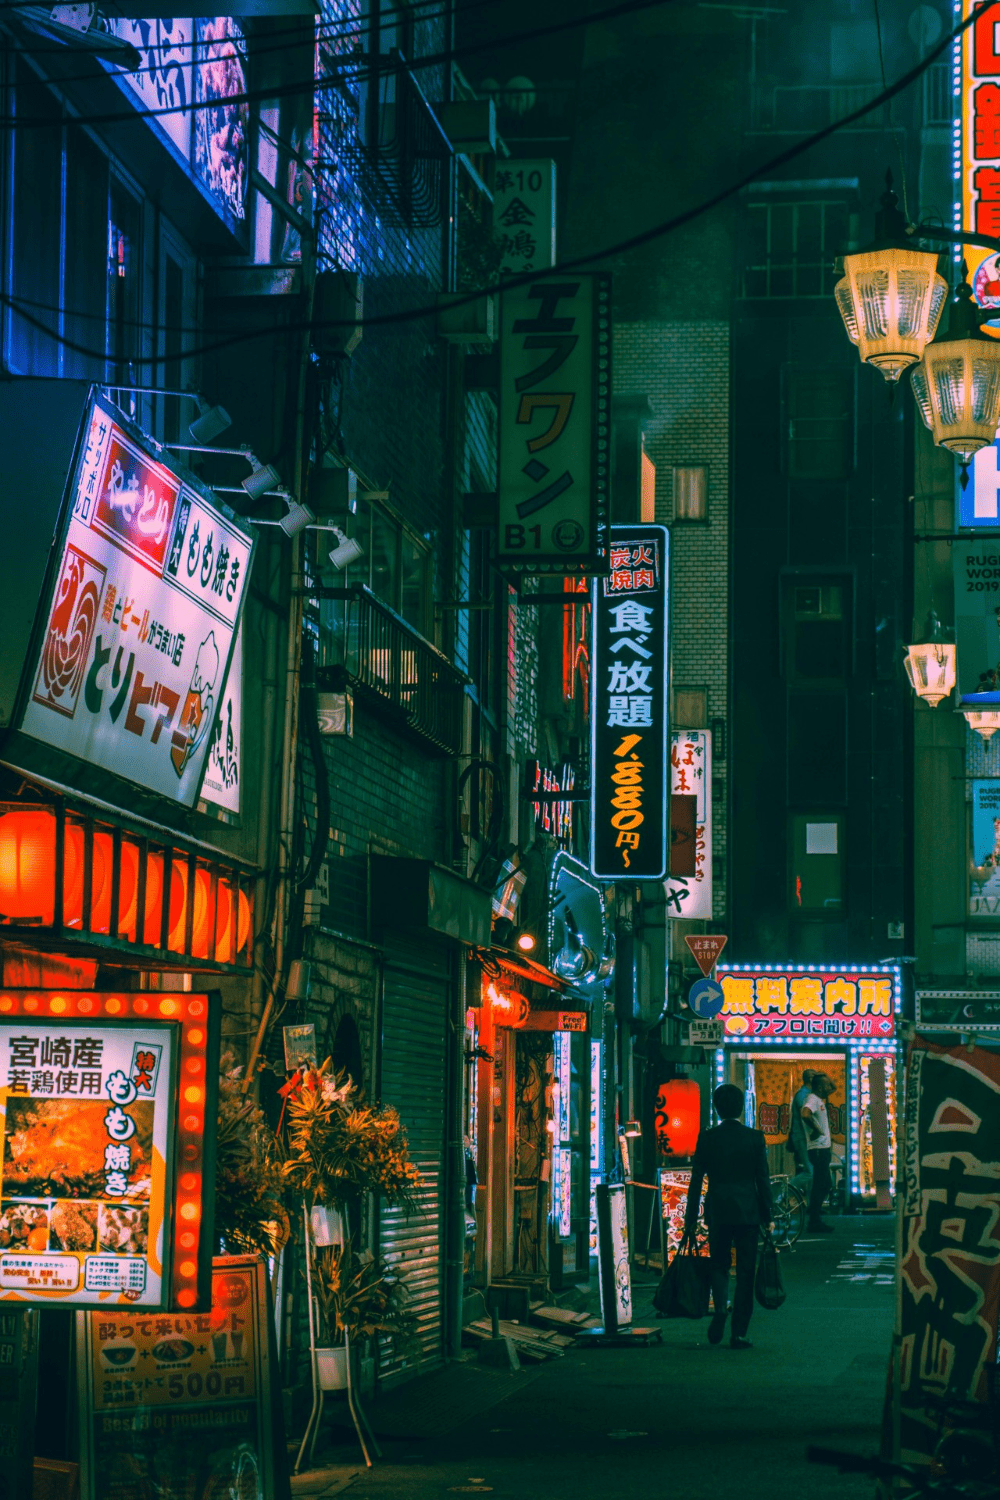 A street with many neon lights and signs - Tokyo